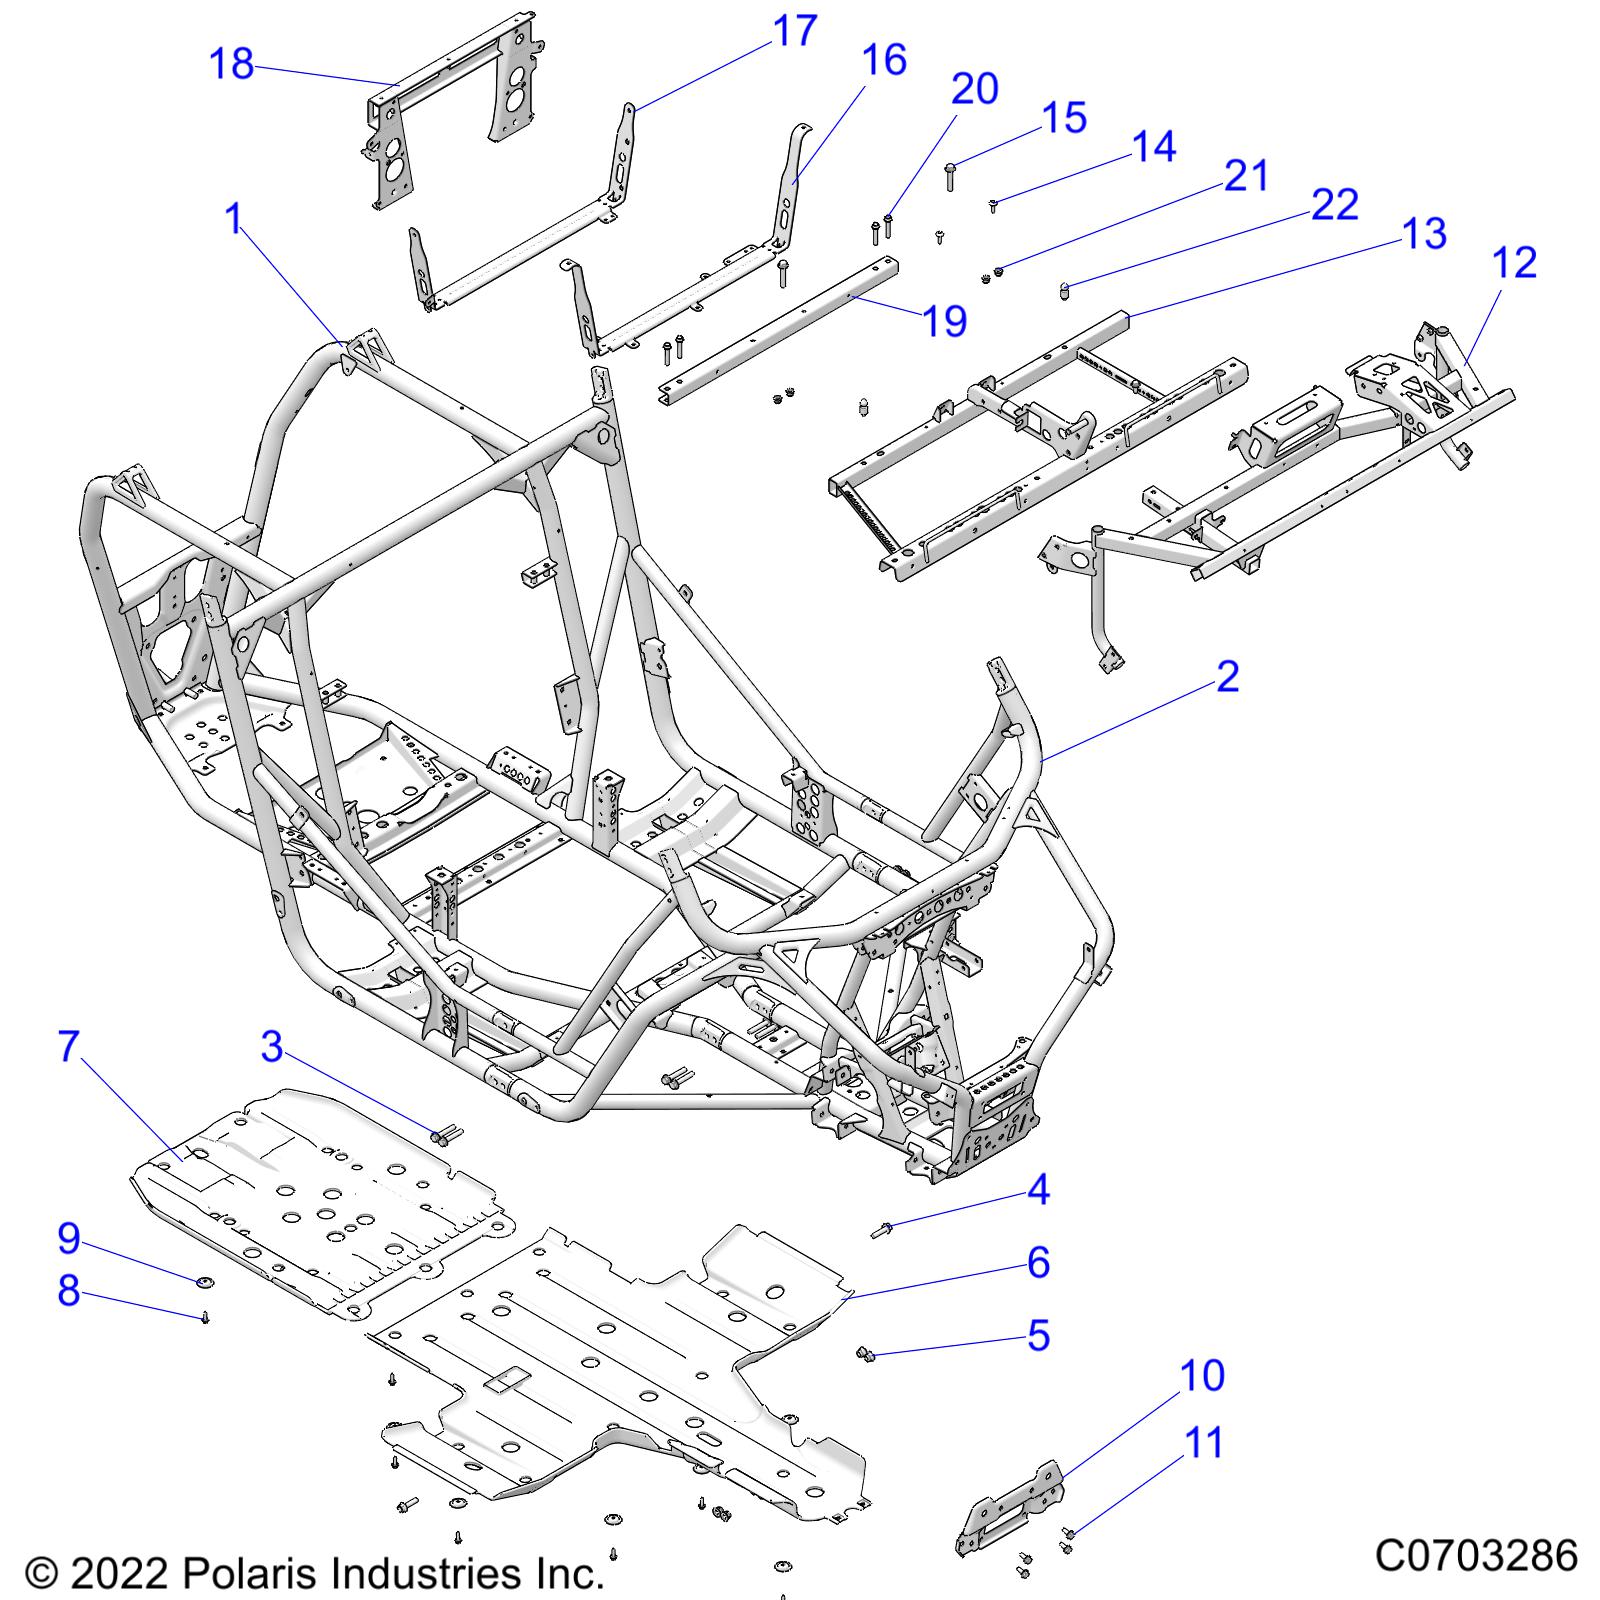 Part Number : 1020571-329 SEAT BASE ASSEMBLY